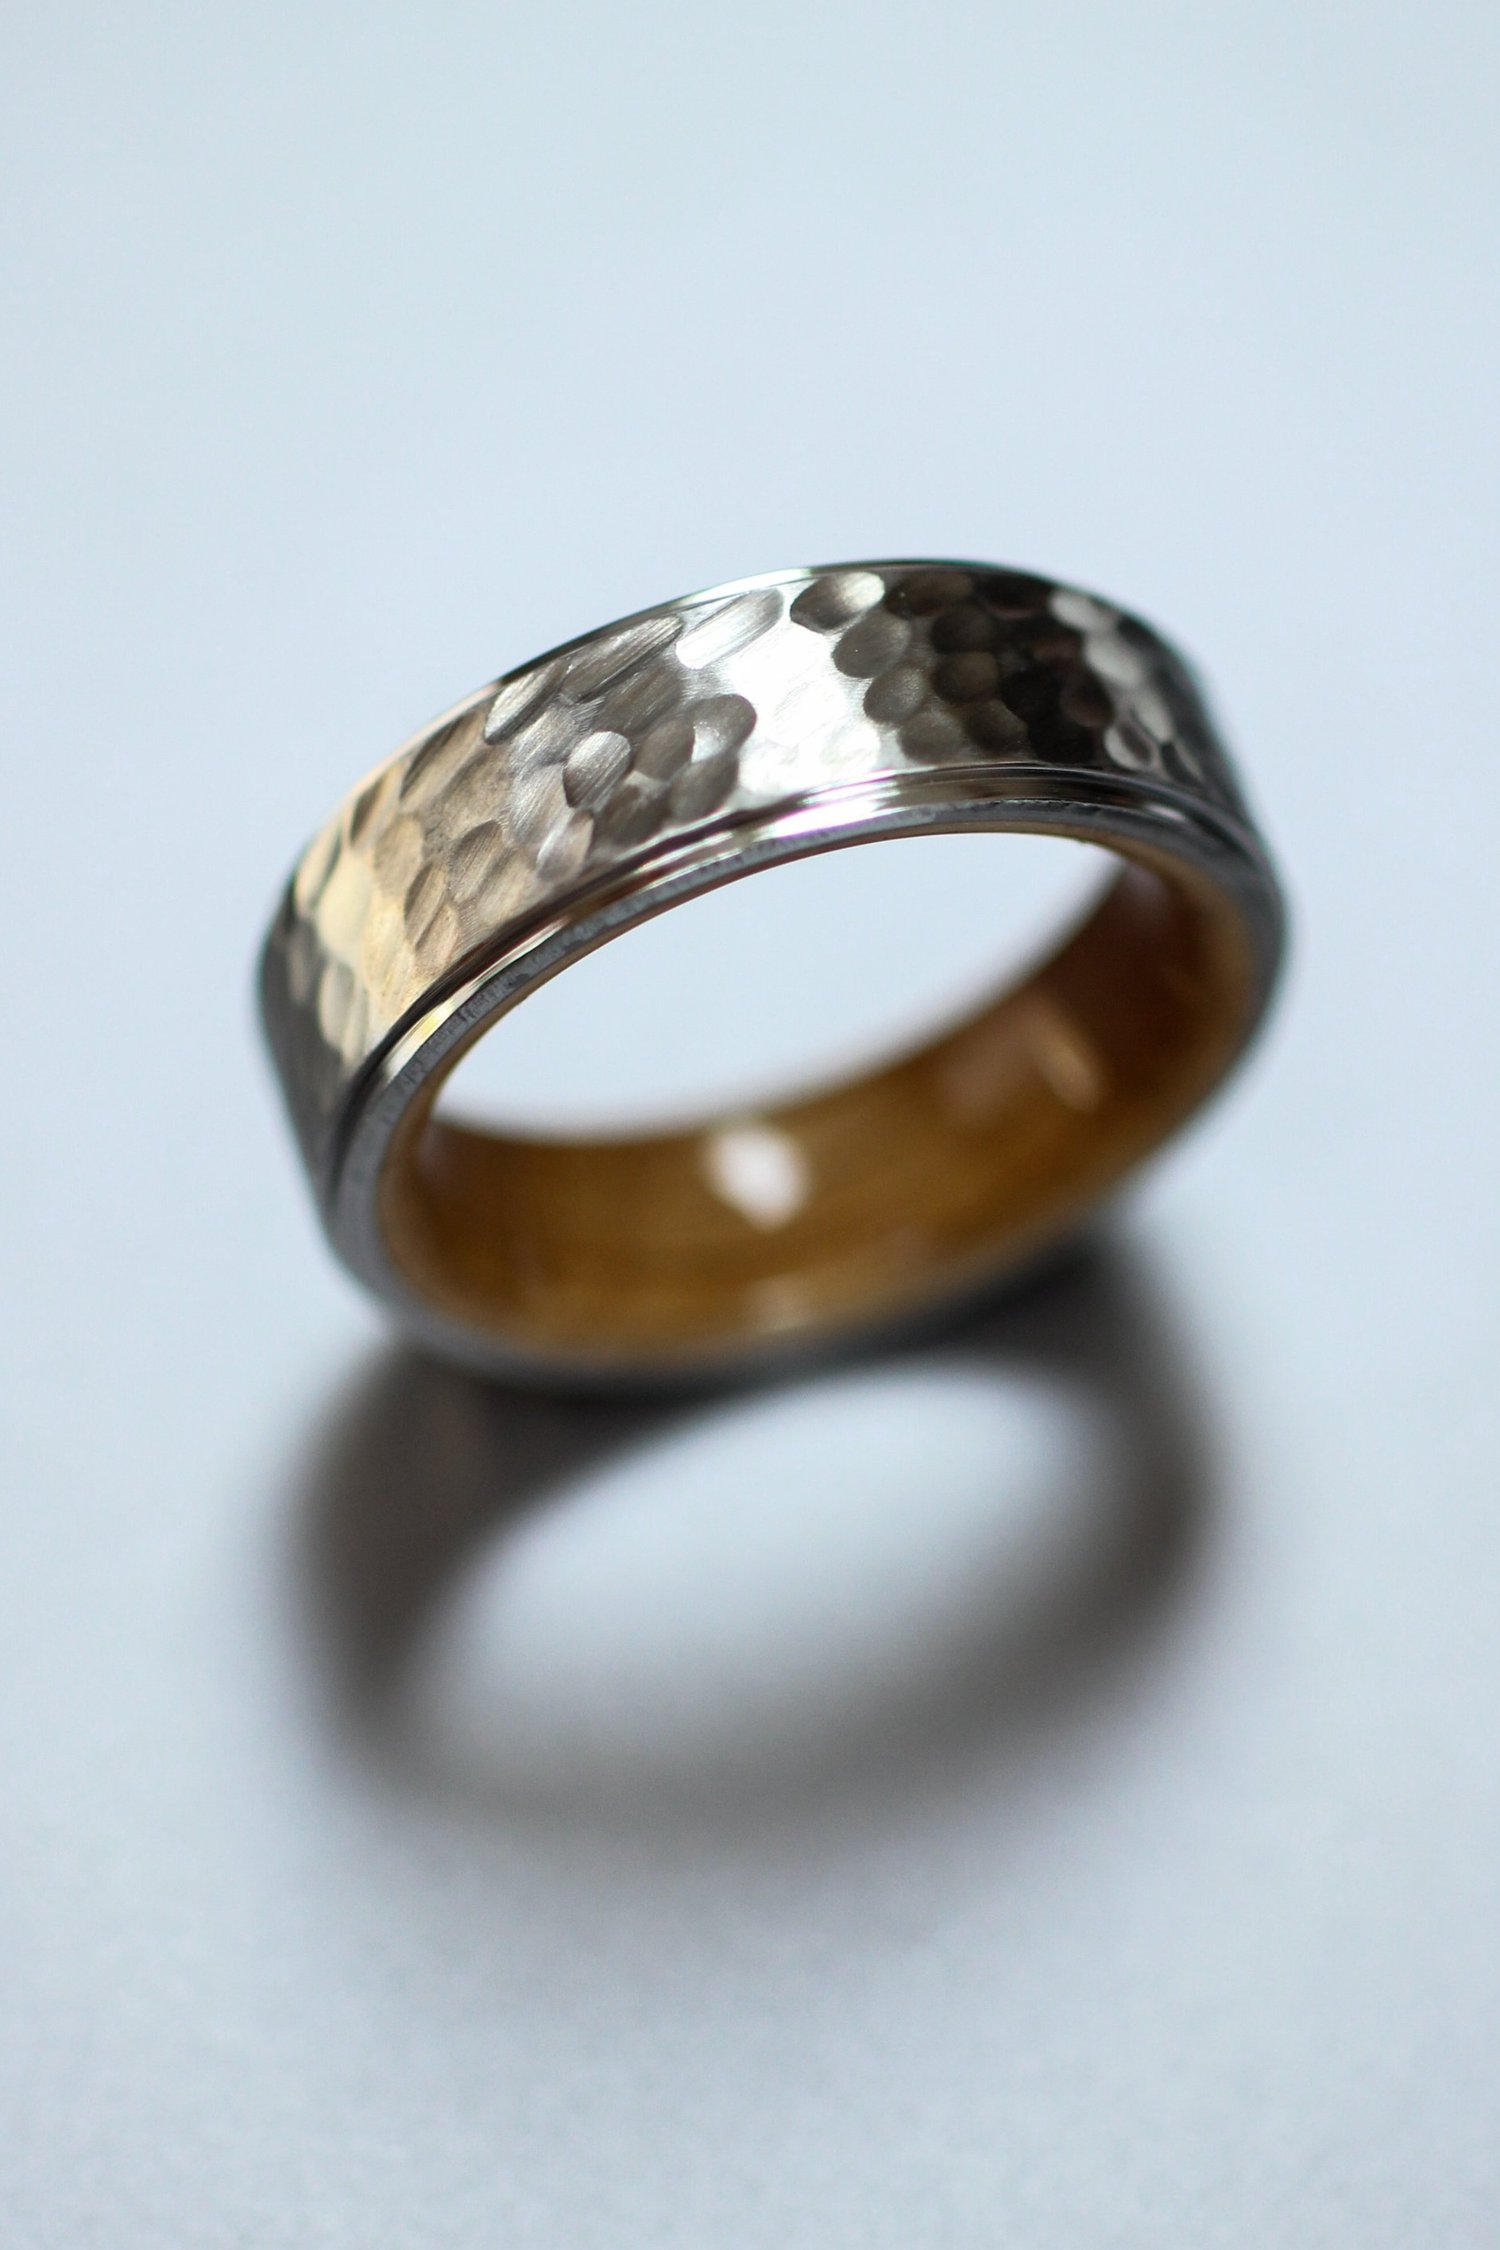 Auto-Inspired Engagement/Wedding Rings Are A Bespoke Way To Say 'I